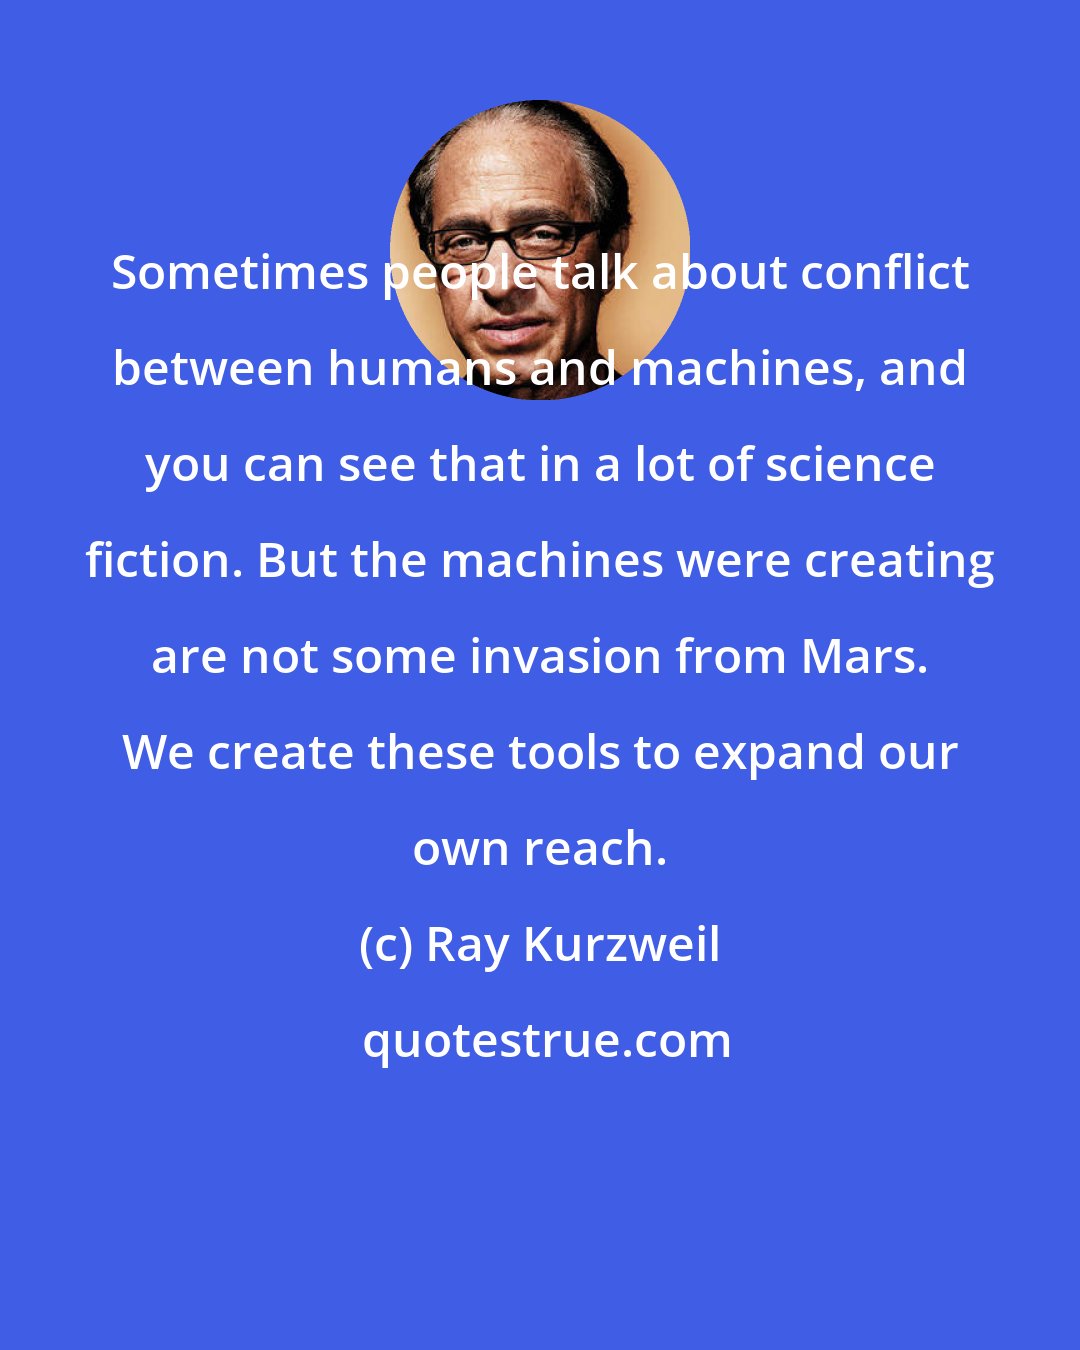 Ray Kurzweil: Sometimes people talk about conflict between humans and machines, and you can see that in a lot of science fiction. But the machines were creating are not some invasion from Mars. We create these tools to expand our own reach.